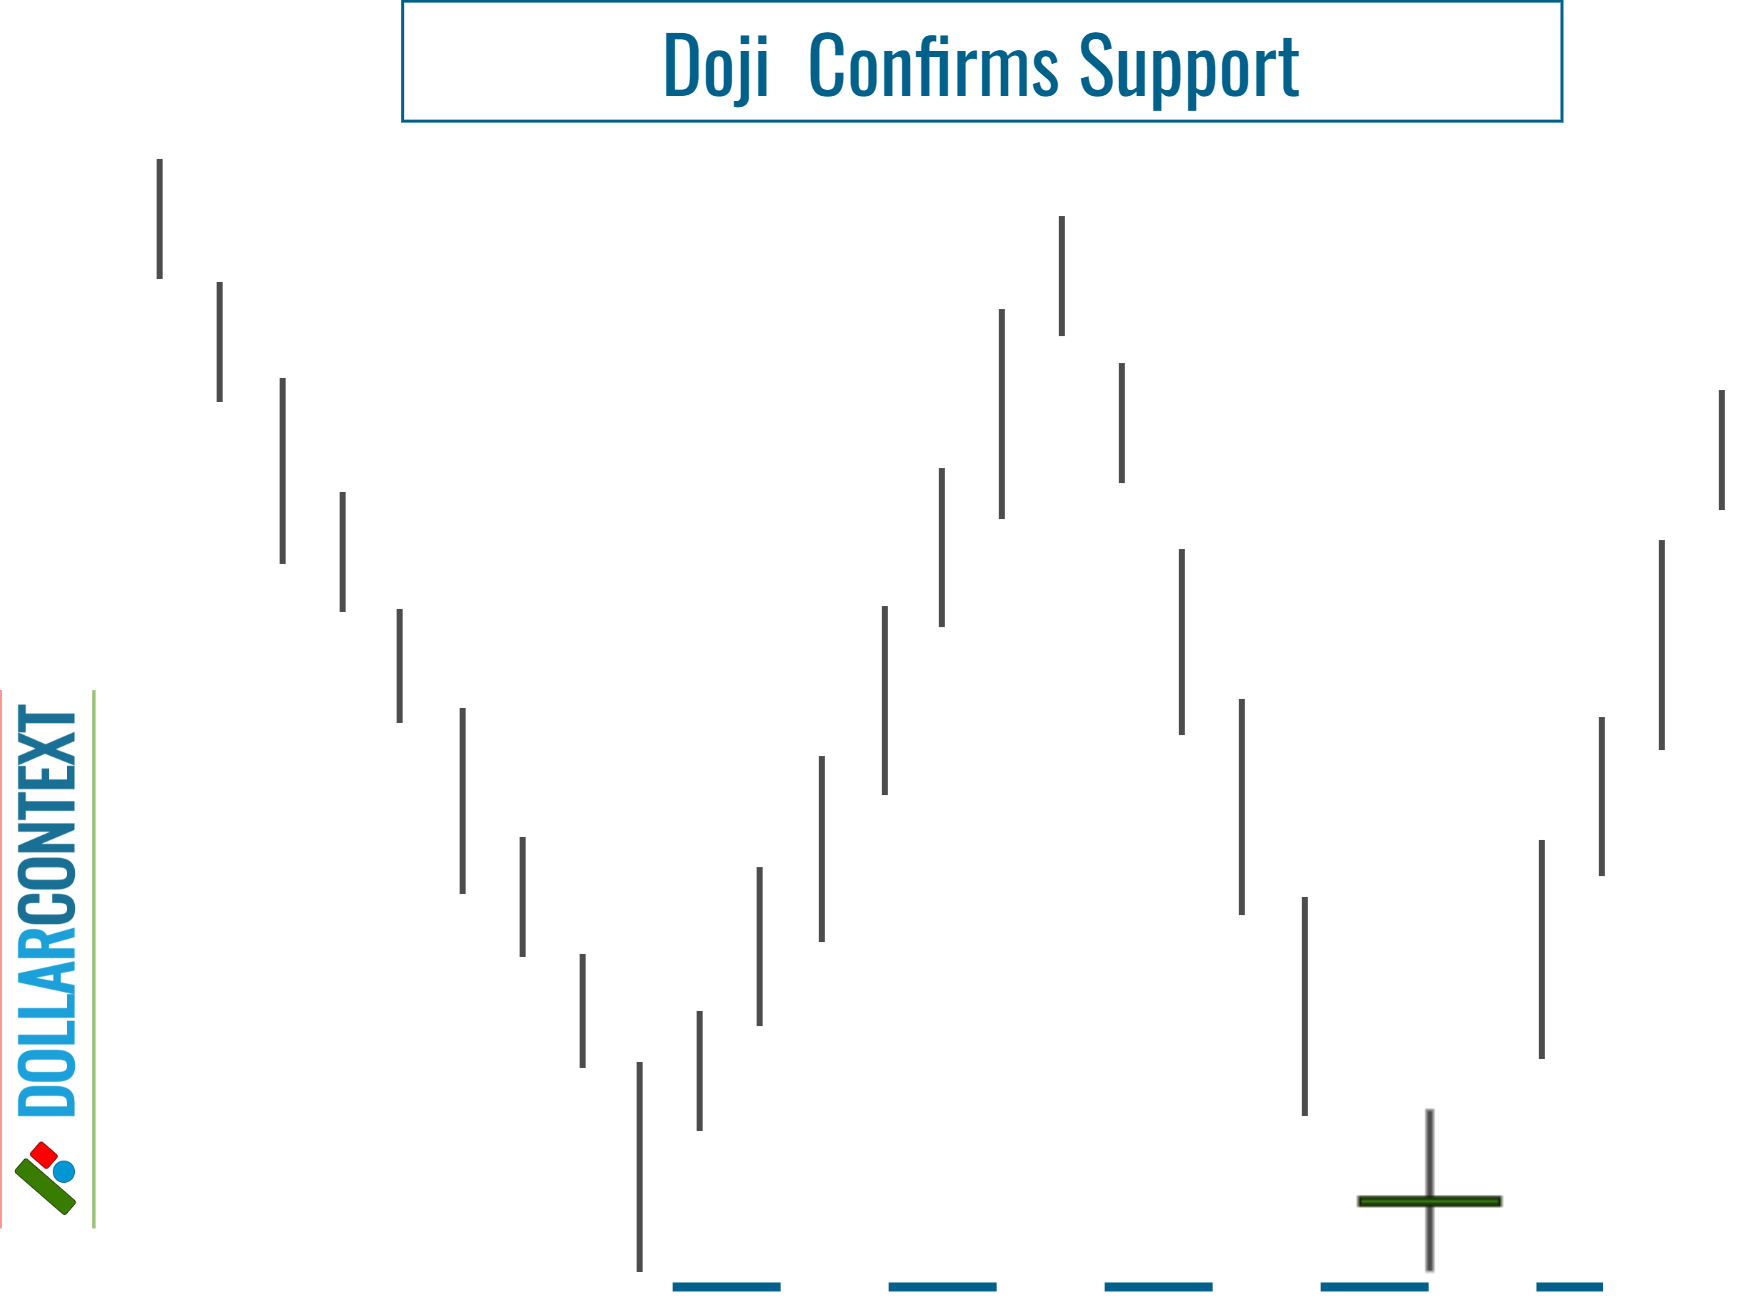 Doji Confirms Support After a Downtrend